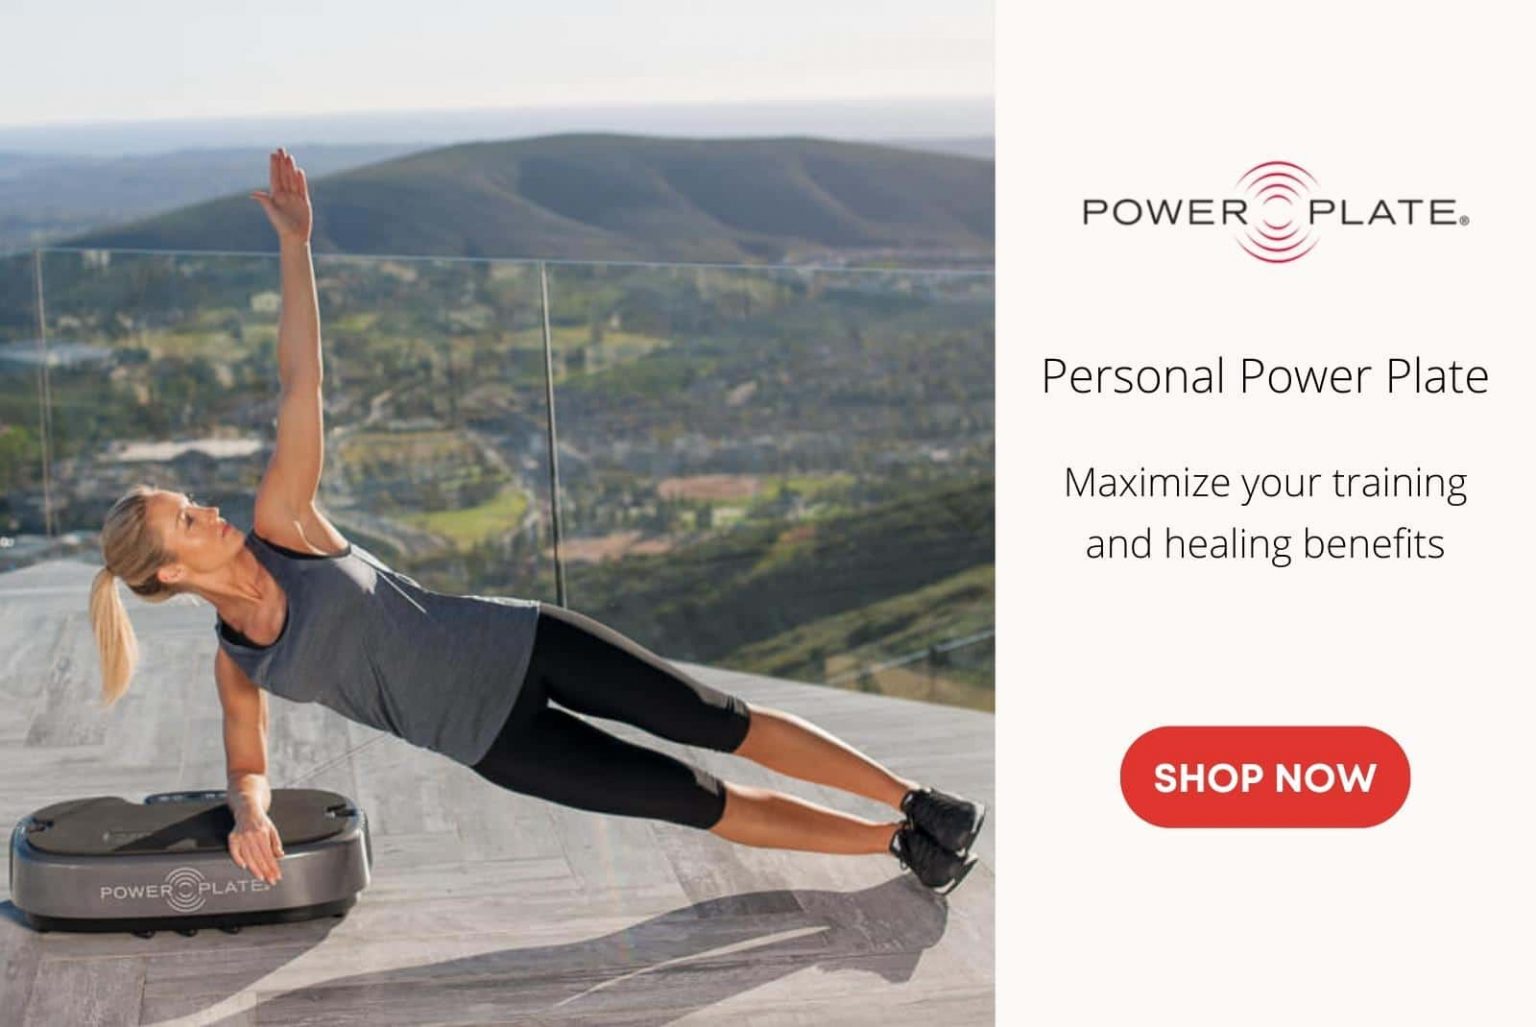 Maximize your training and health benefits with the Personal Power Plate